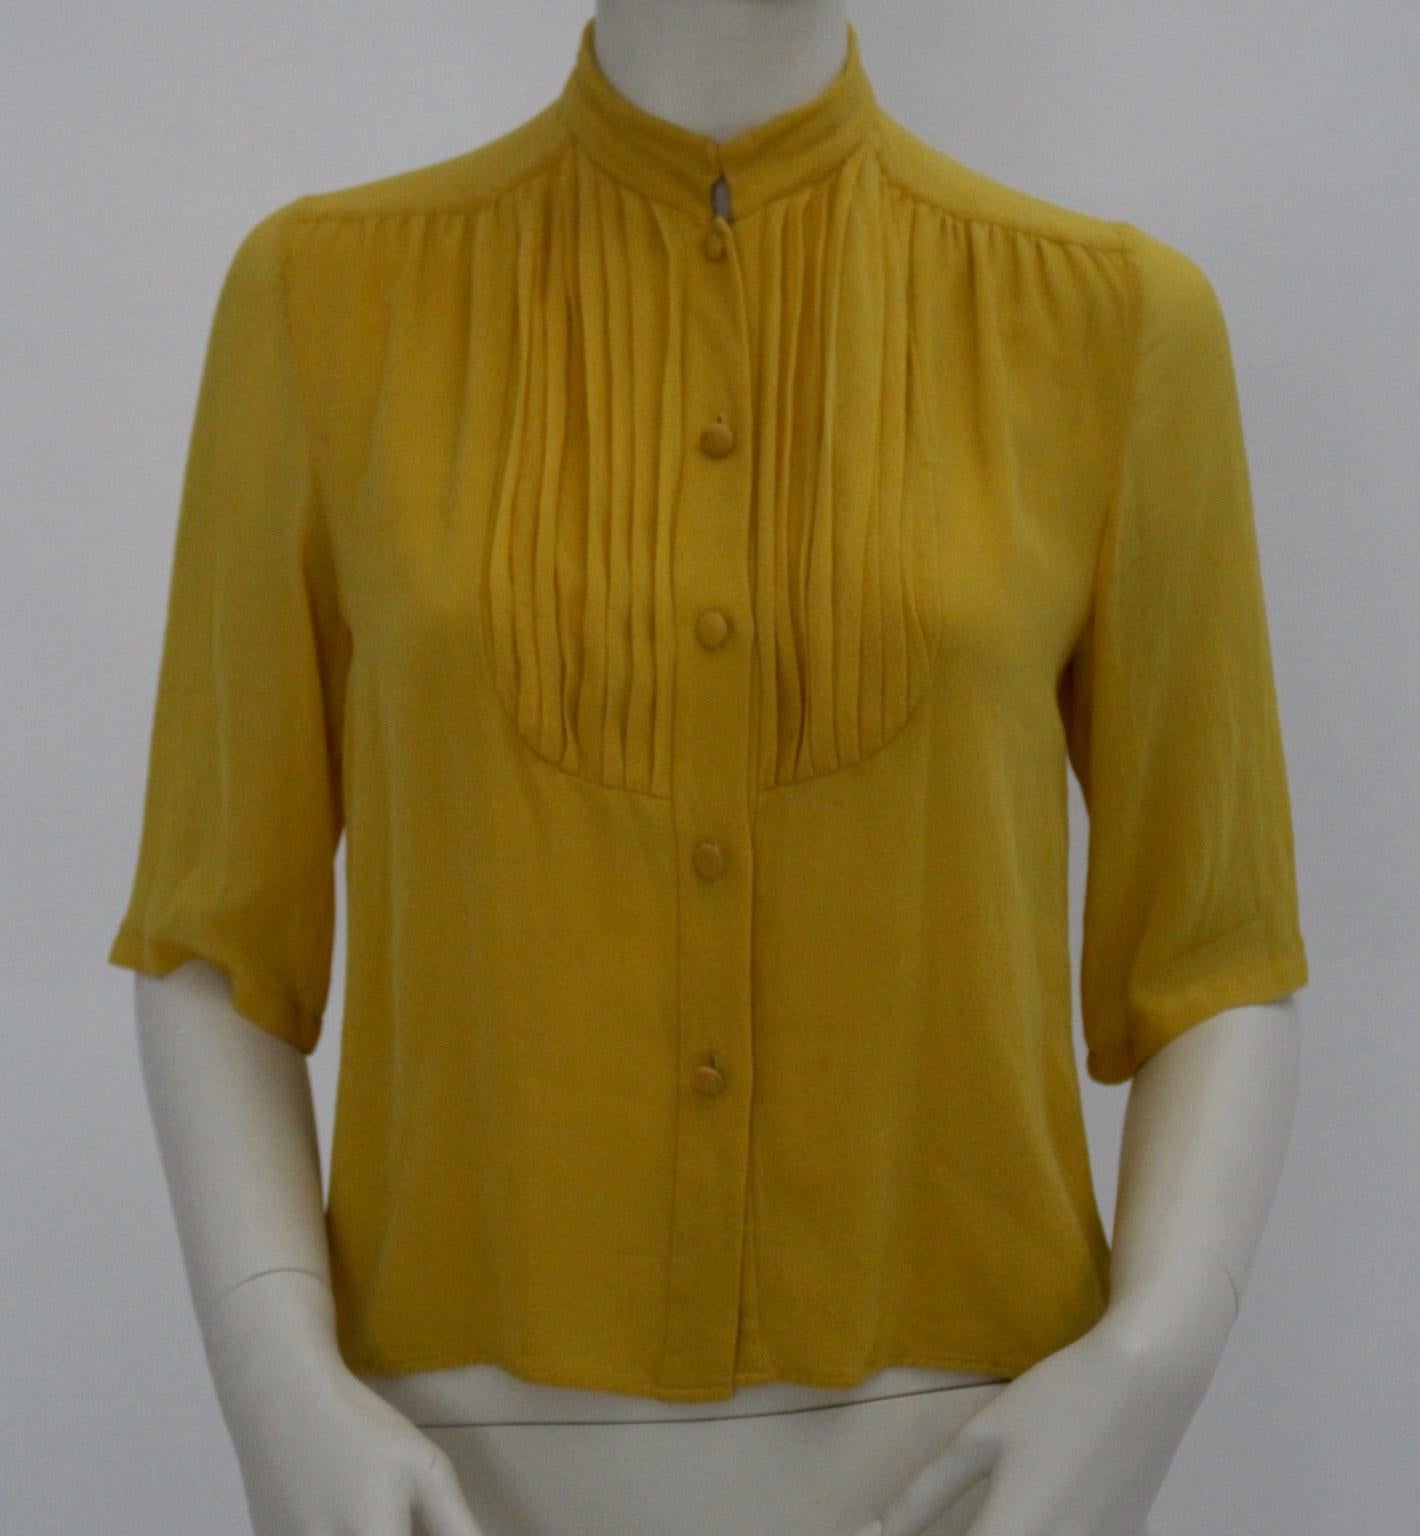 This blouse by Celine was designed in the 1970s and made of 100 % Georgette - Crepe Silk.
Standing collar and decorated with cords
Front button closure
Very good vintage condition 
